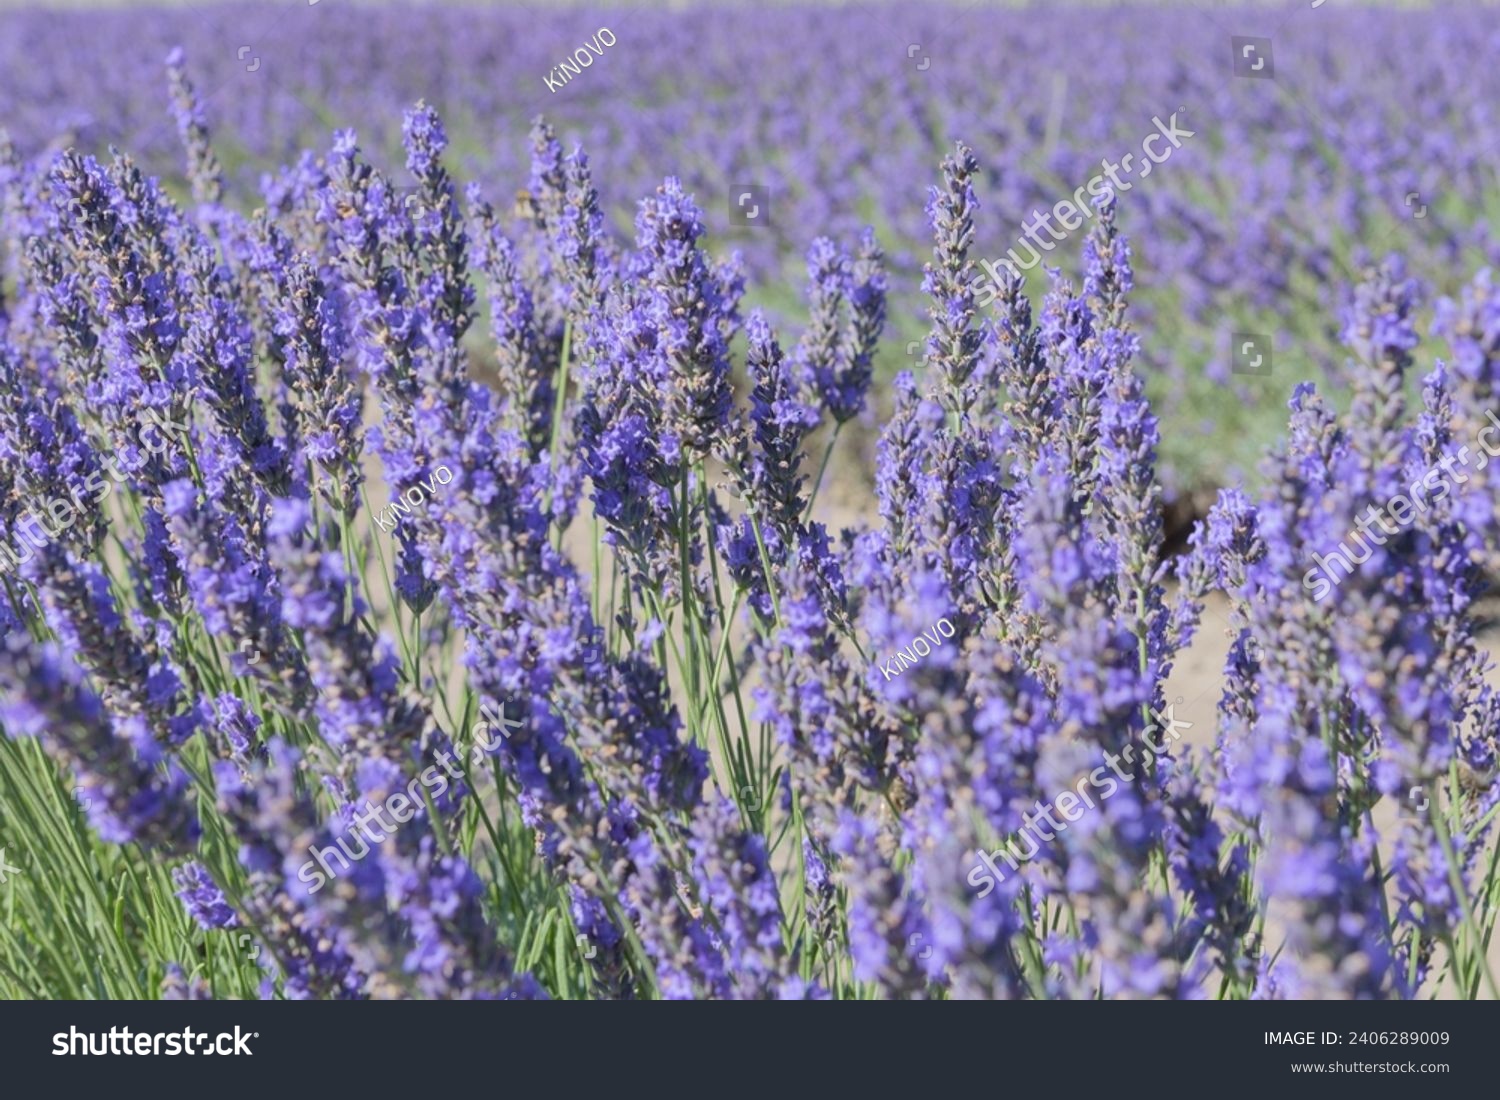 Purple field of fresh blooming lavender. Flavoring aromatic plants in sunny day landscape. Wallpaper background #2406289009